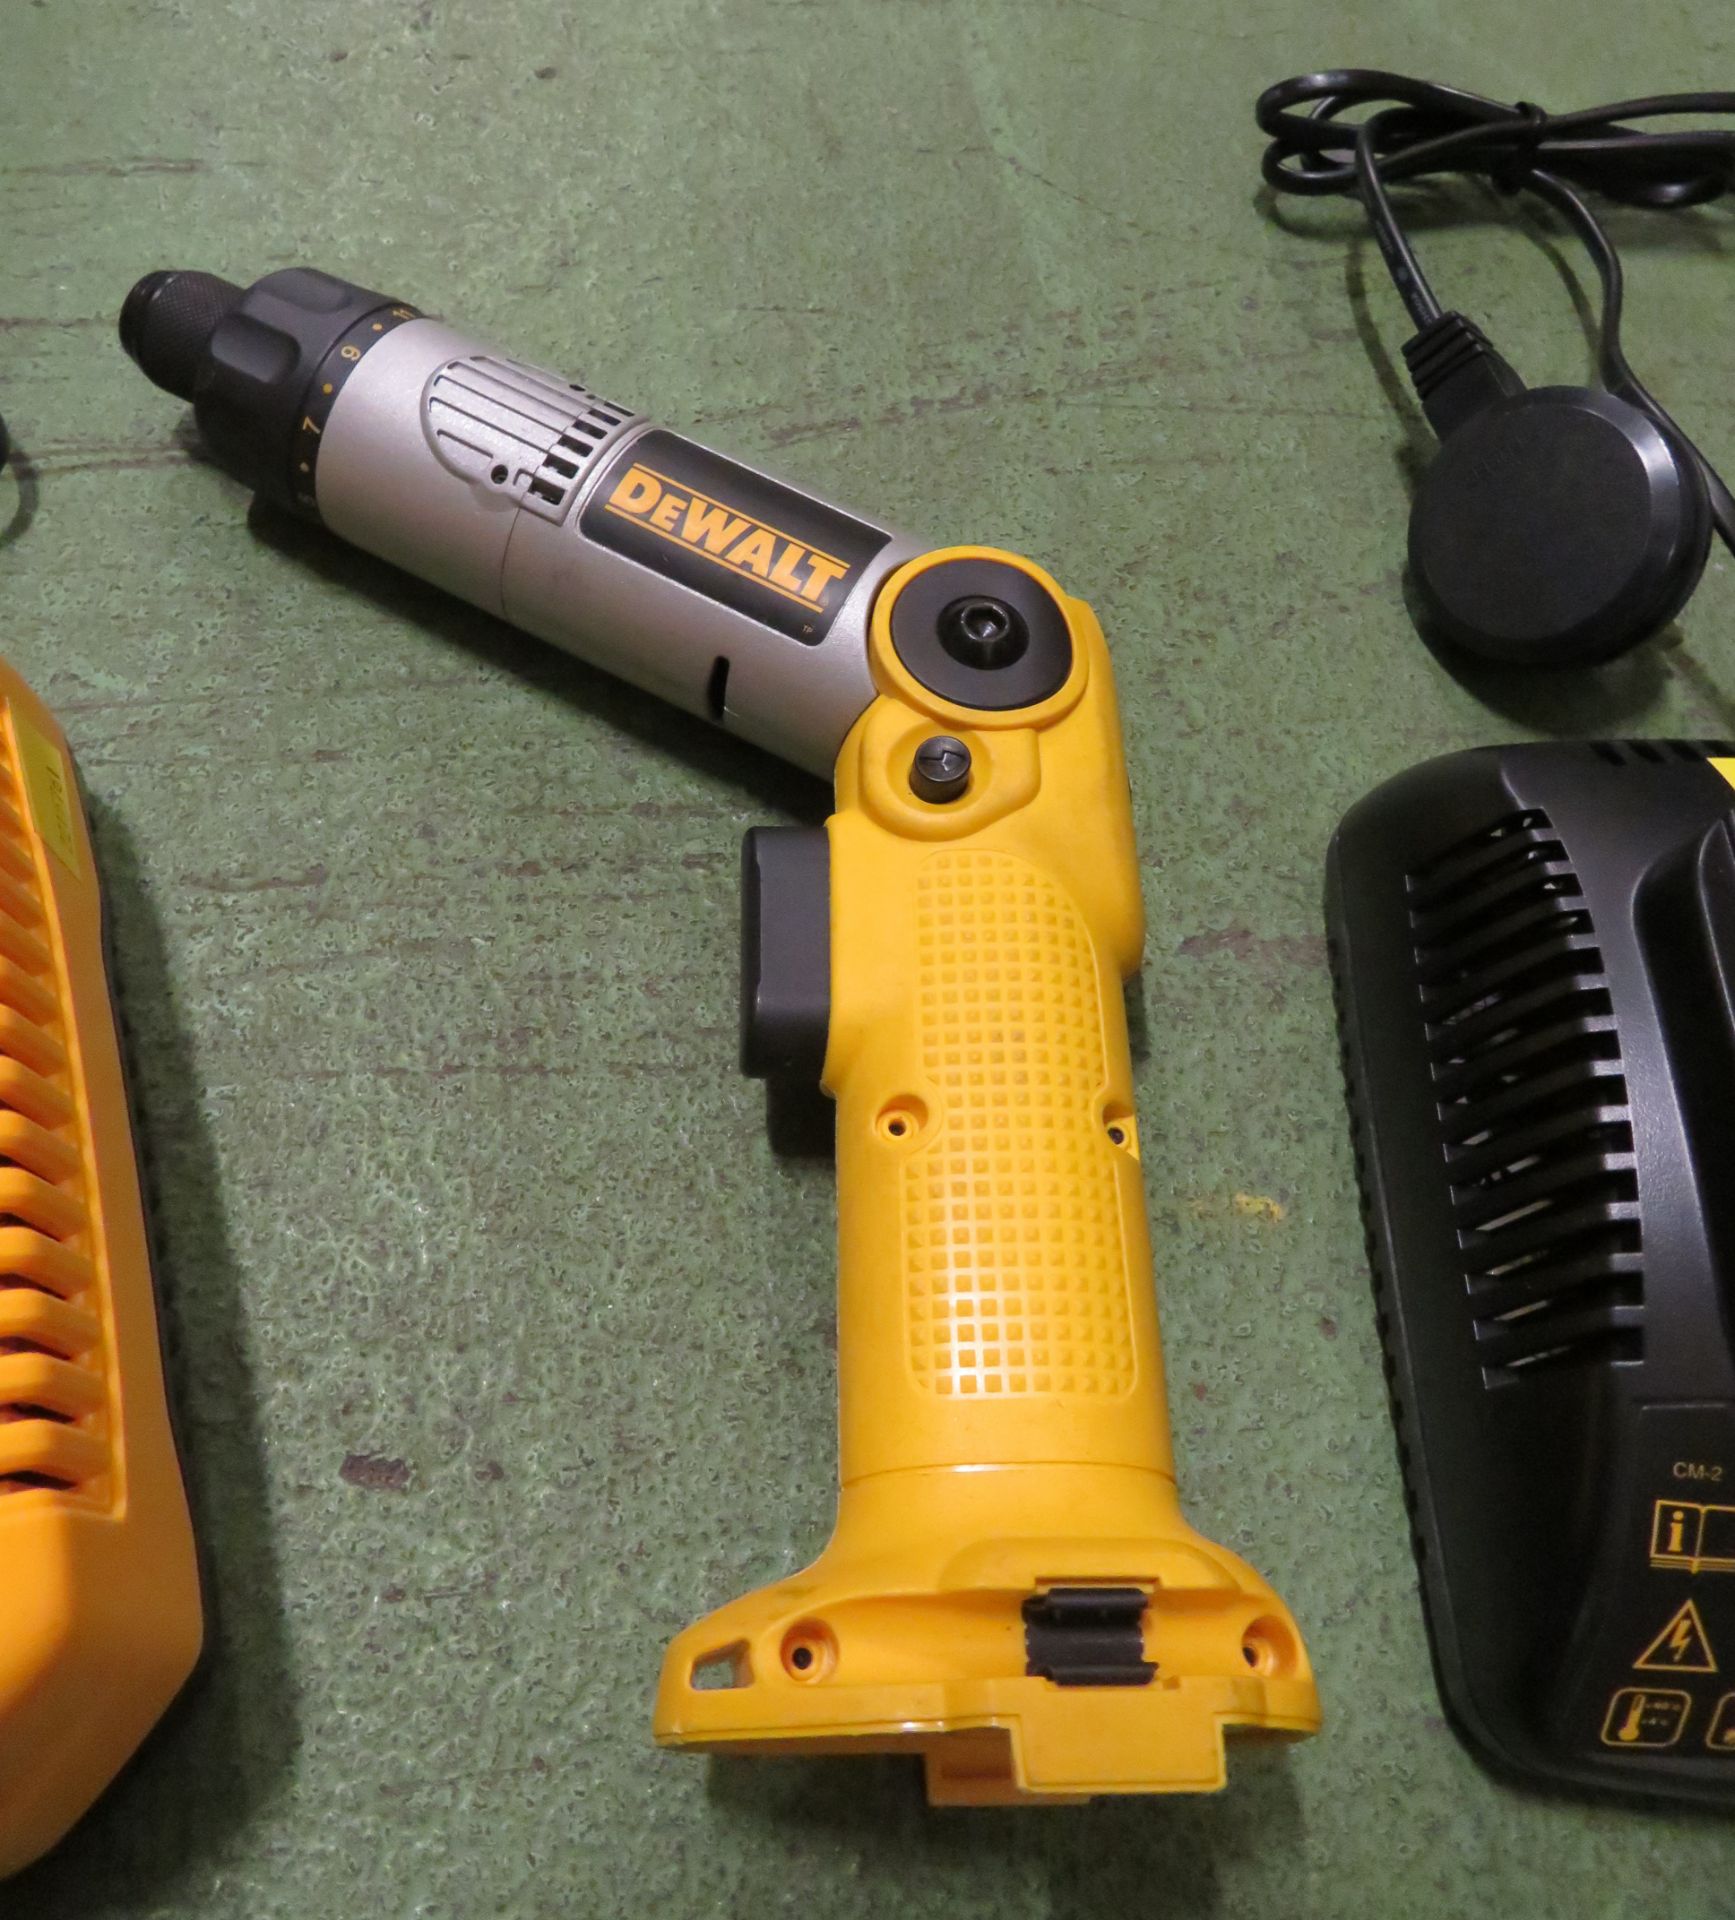 DeWalt DW920 Cordless Multiangle Drill & Charger - Image 2 of 2